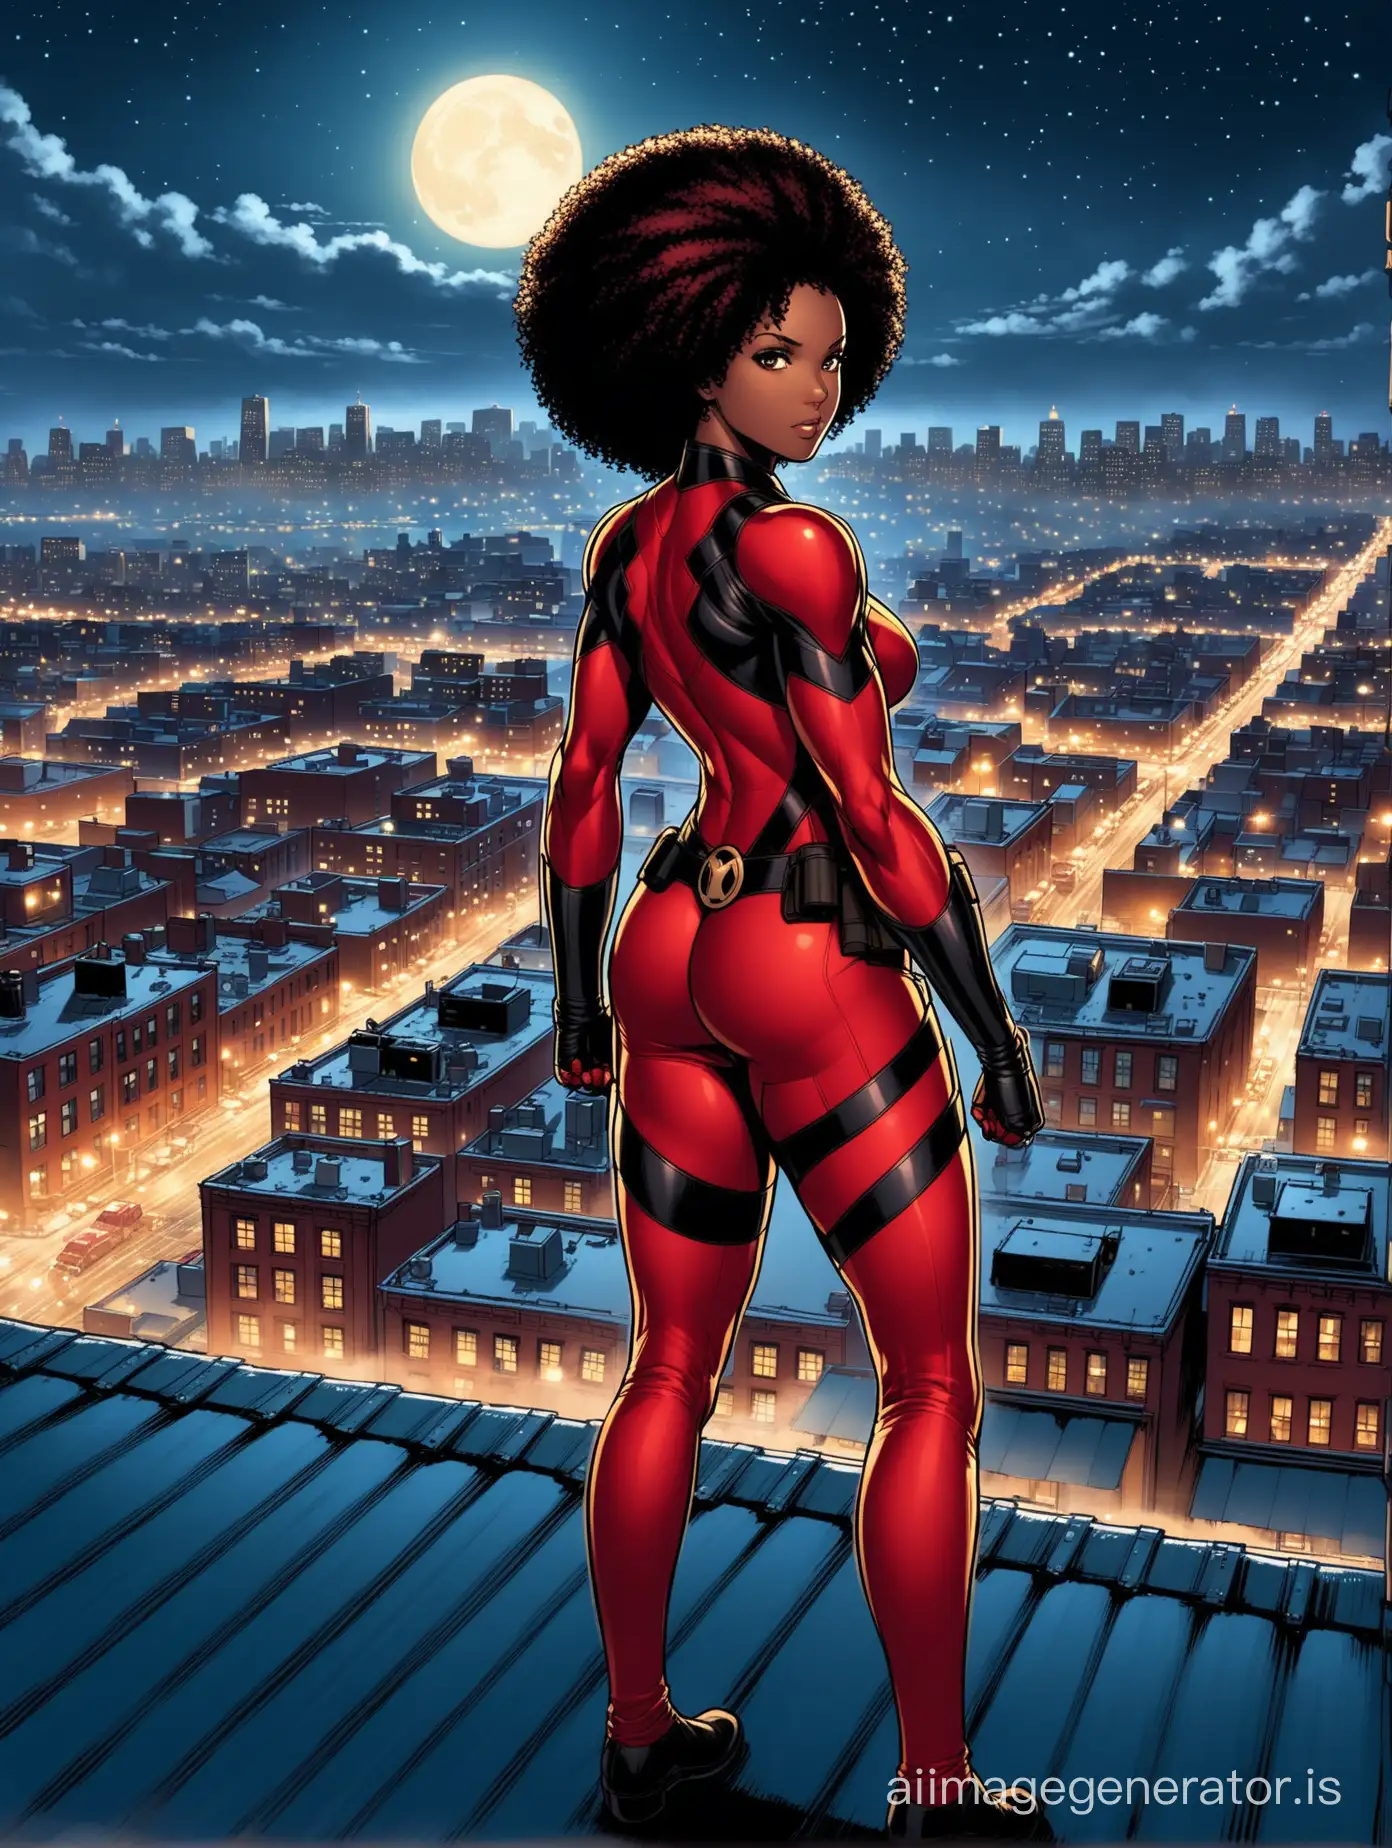 Misty Knight patrolling the rooftops of Harlem, the city lights twinkling below.